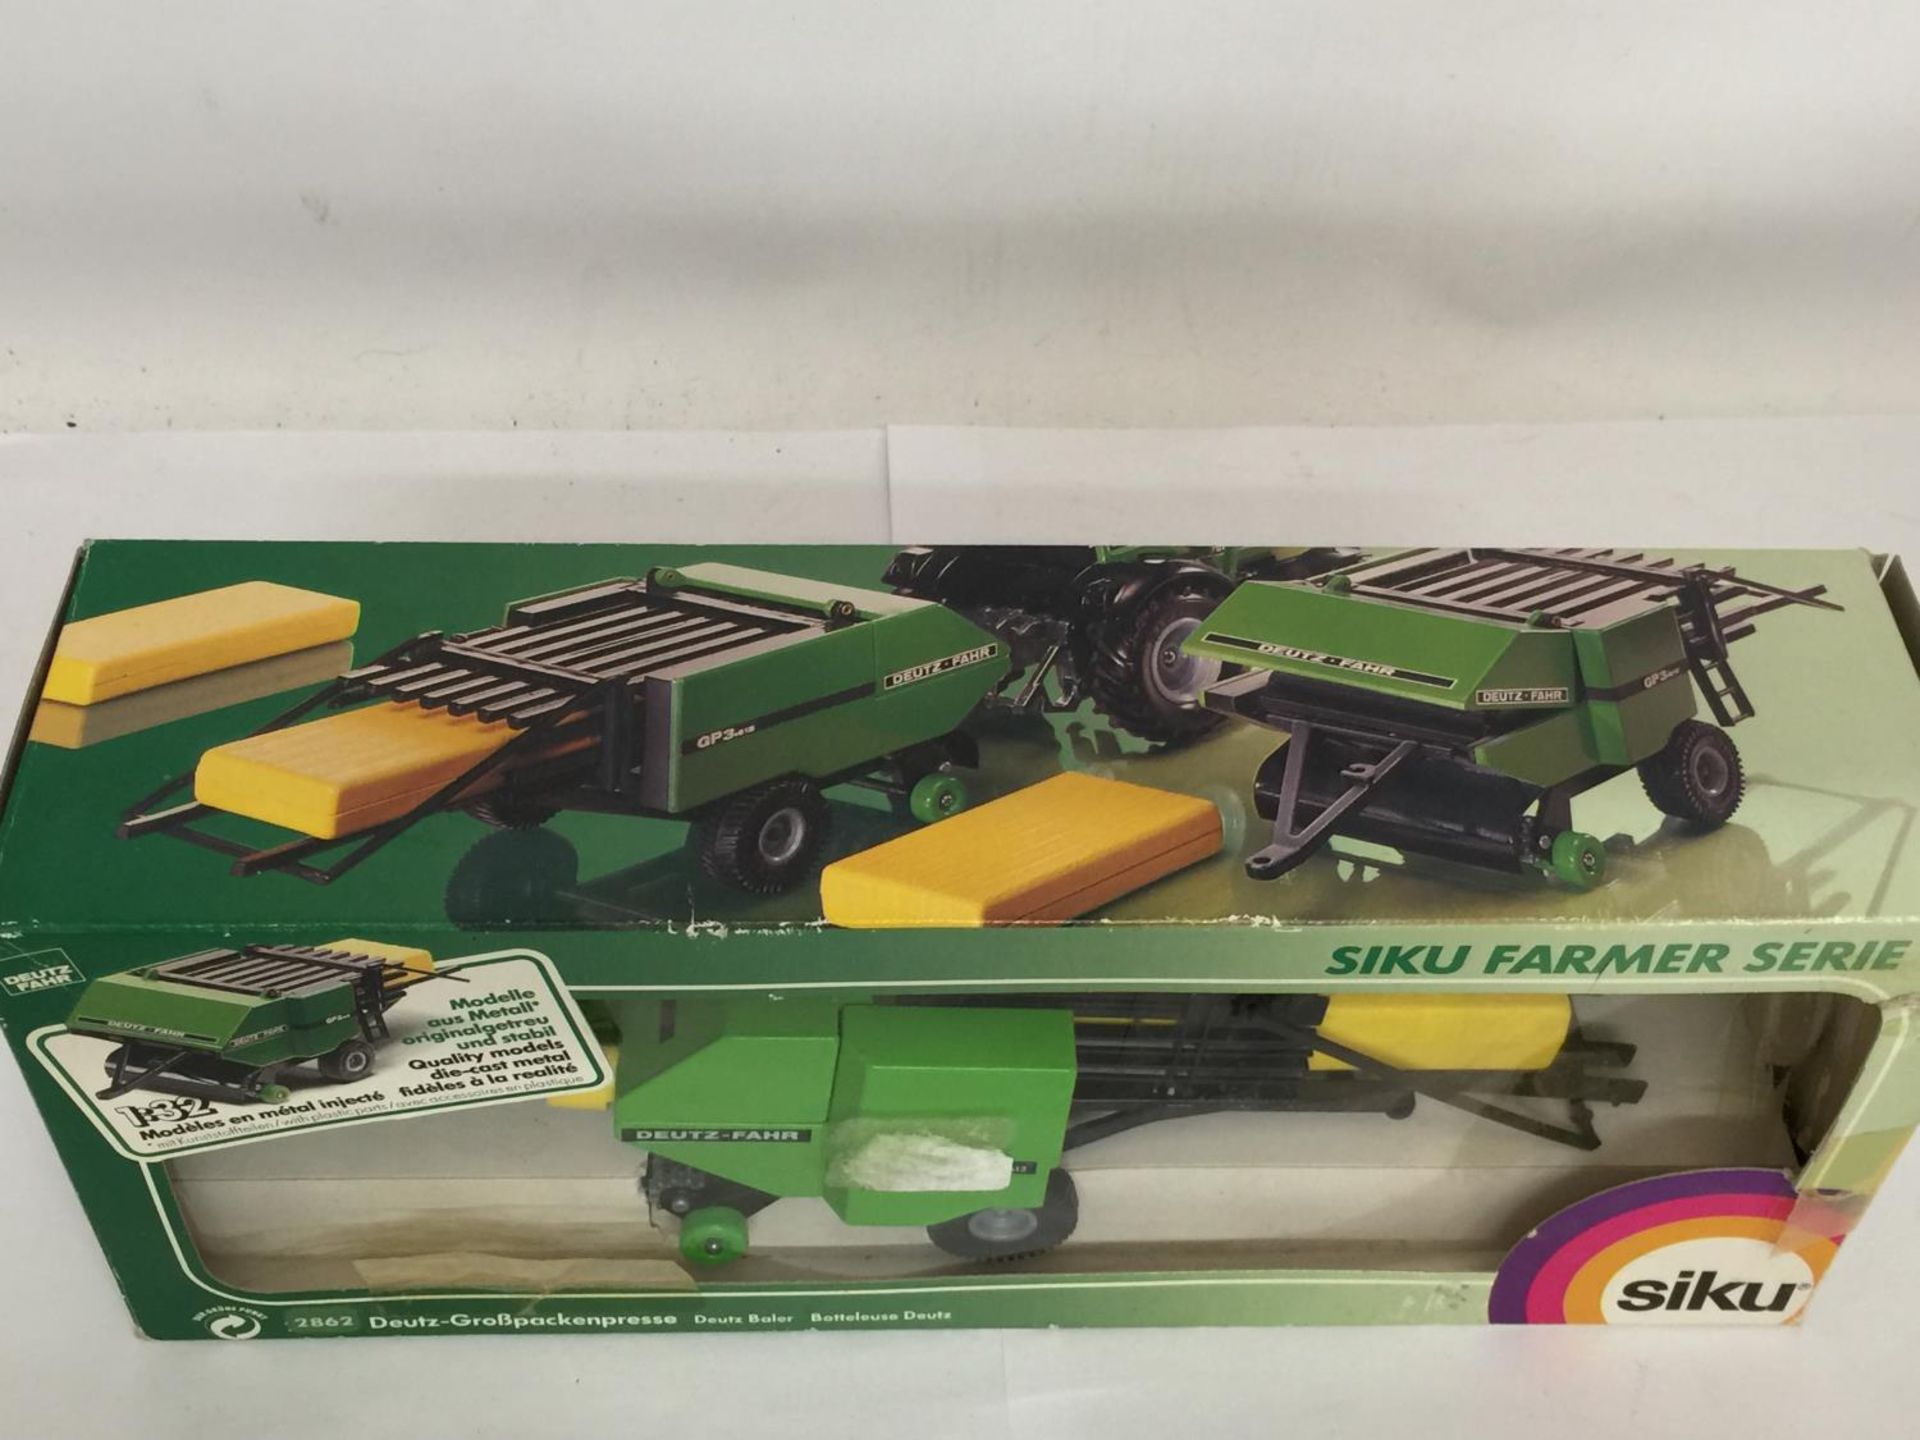 TWO BOXED FARM MODELS, A SCHUCO FENDT TRACTOR, 1/43 SCALE AND A SIKU DEUTZ BALER, 1/32 SCALE - Image 4 of 5